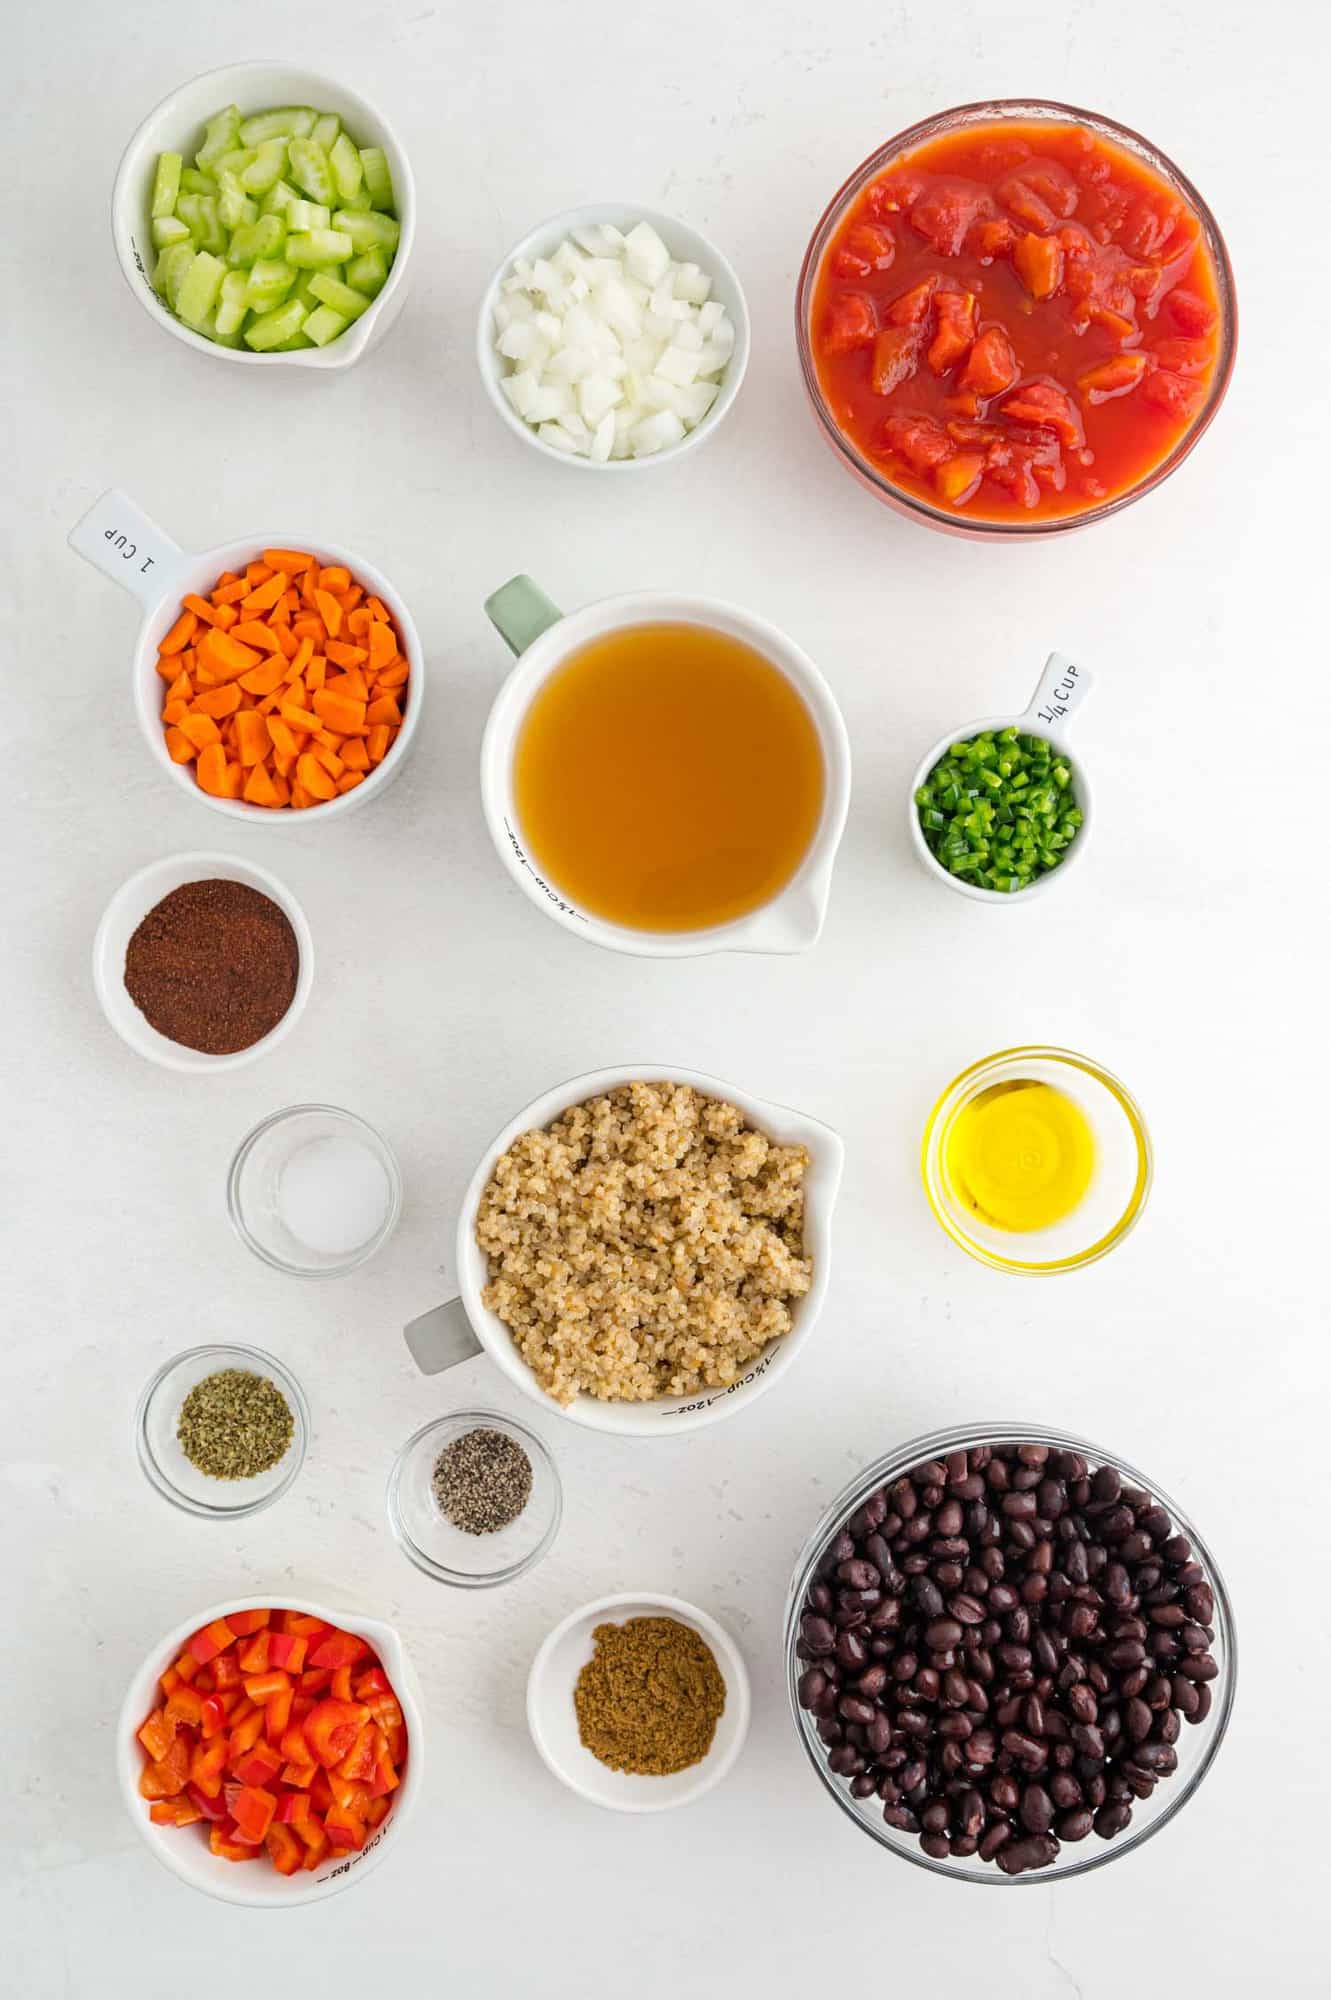 Overhead view of ingredients in separate bowls including quinoa.